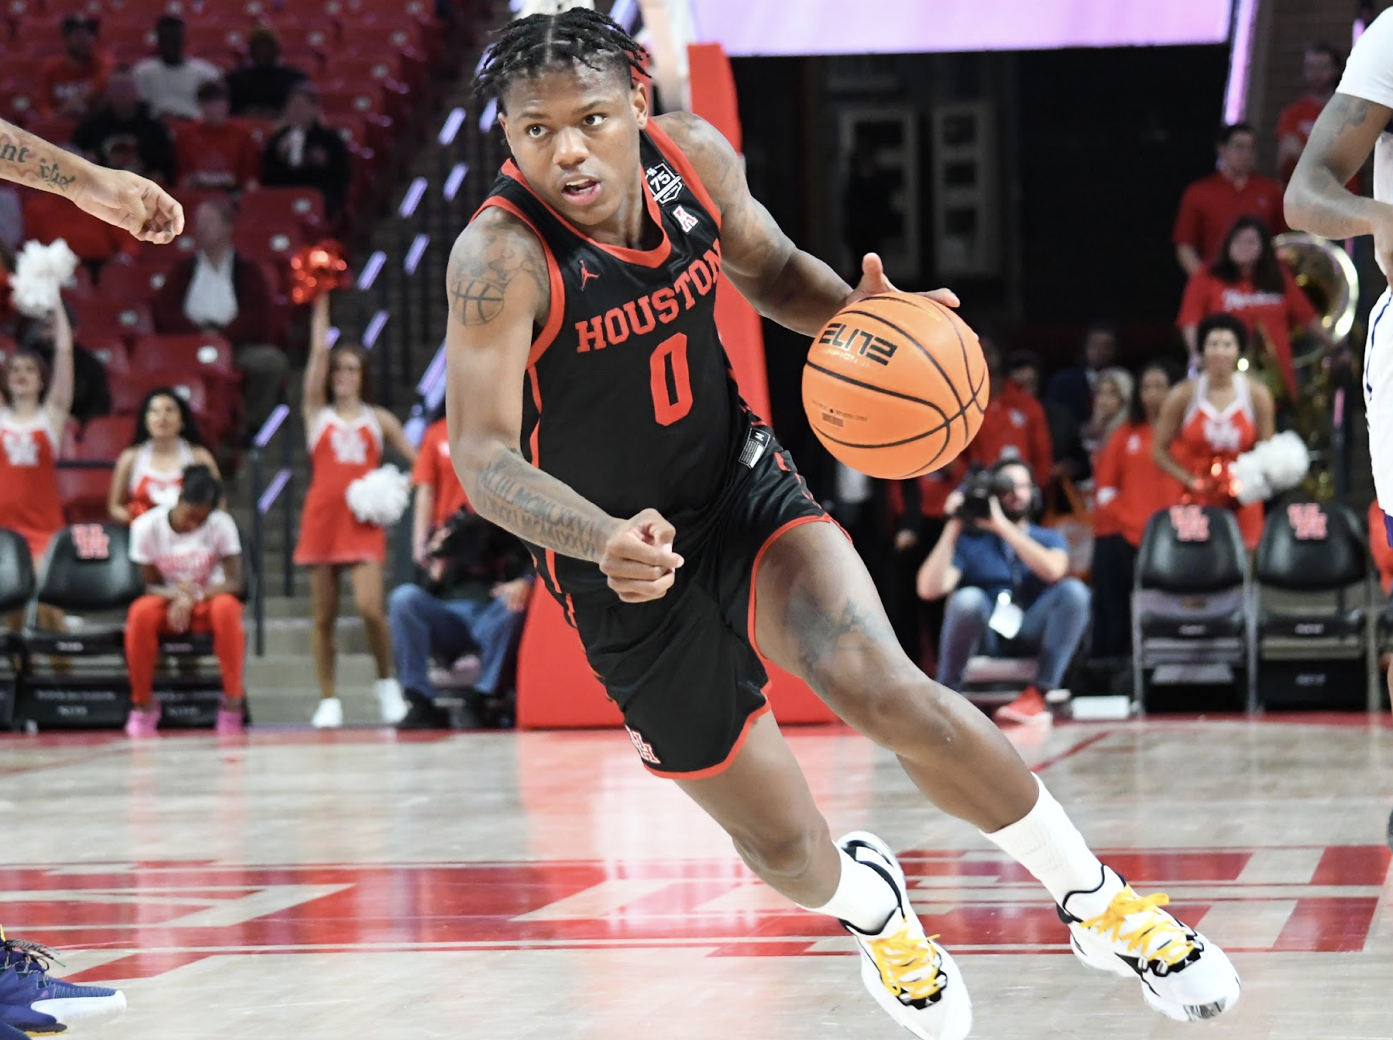 UH guard Marcus Sasser led the Cougars with 25 points in their loss to No. 9 Alabama on Saturday night in Tuscaloosa. | Steven Paultanis/The Cougar